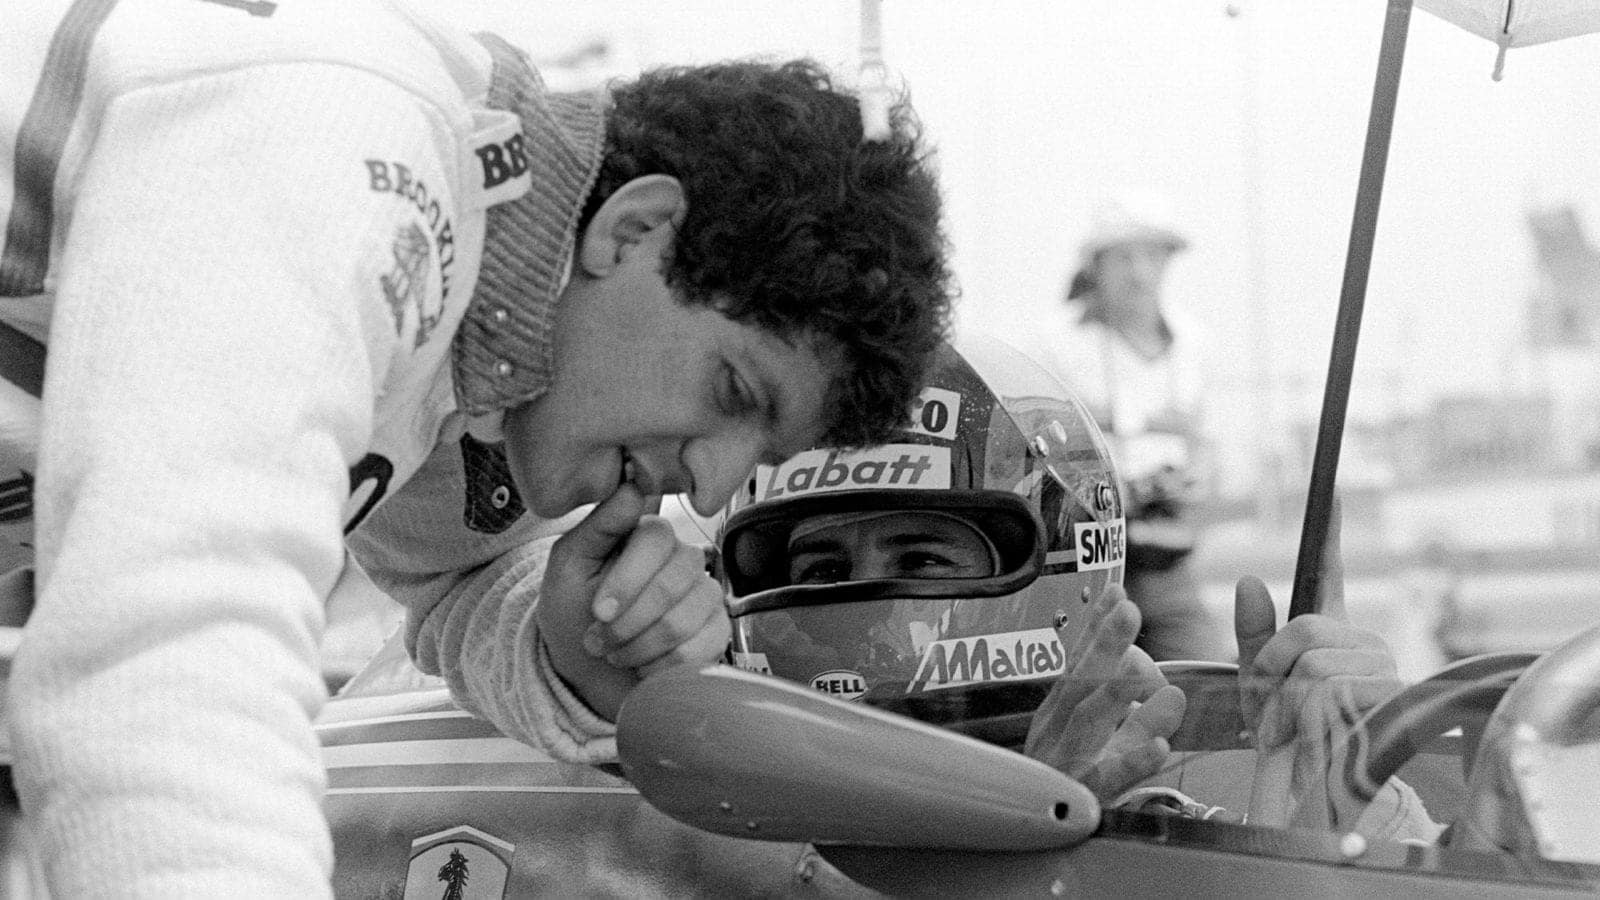 Jody Scheckter leans over his Ferrari team mate Gilles Villeneuve to discuss the set-up during a practice session for the South African Grand Prix at Kyalami, 3rd March 1979. Villeneuve won and Scheckter came home second. (Photo by Klemantaski Collection/Getty Images)